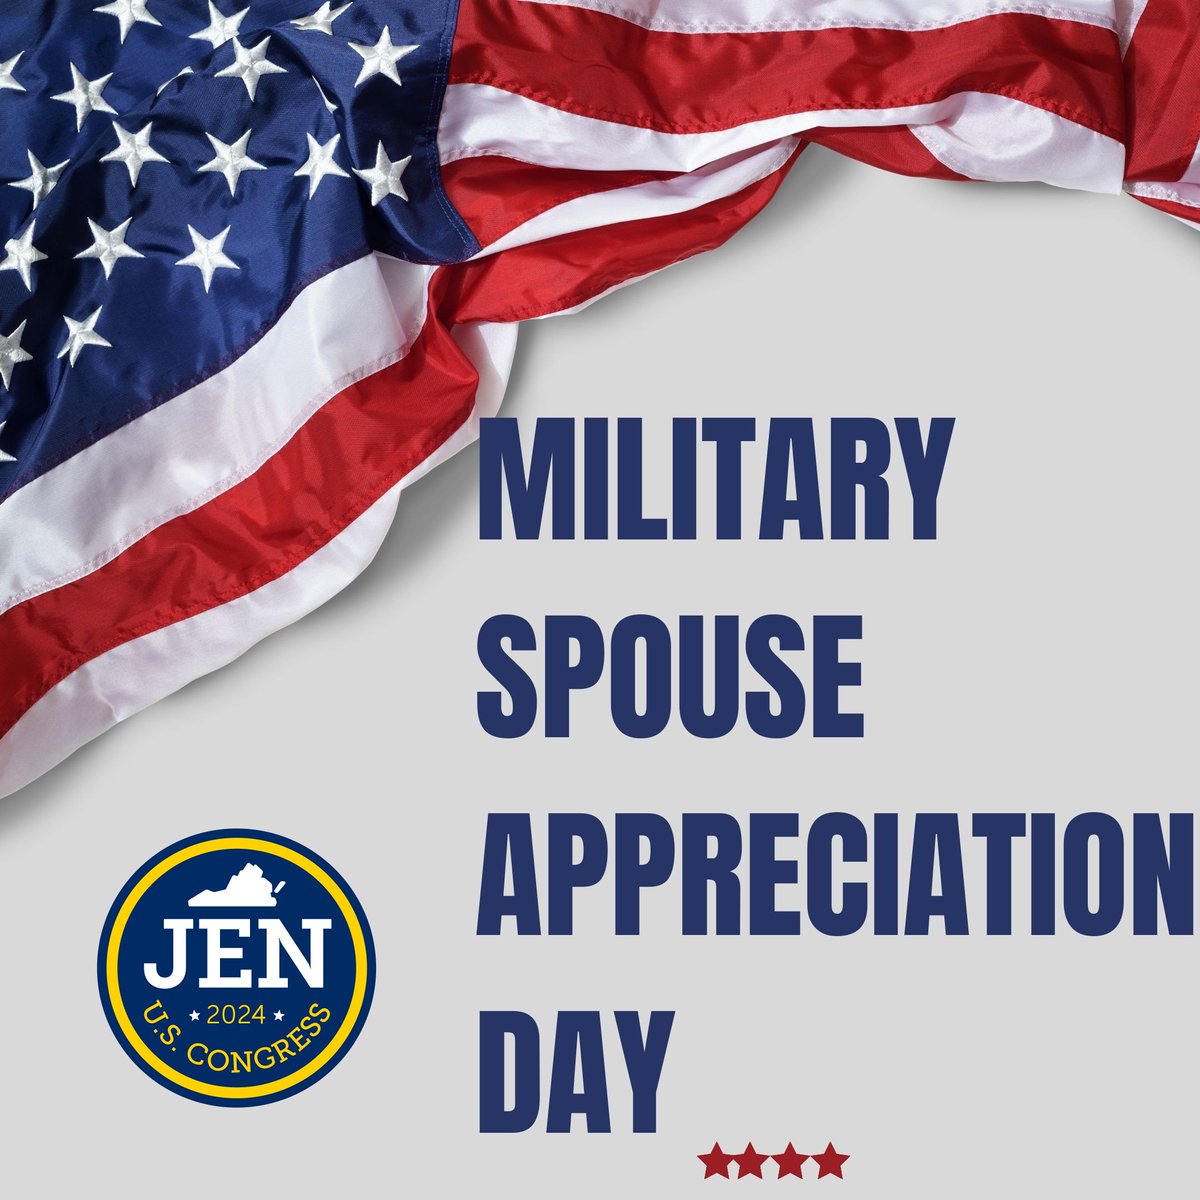 Today is Military Spouse Appreciation Day! Having been a military spouse for 20 years, I’m honored to be a voice for improved employment resources, increased childcare, and better quality of life for military families! Thank you to ALL military spouses!